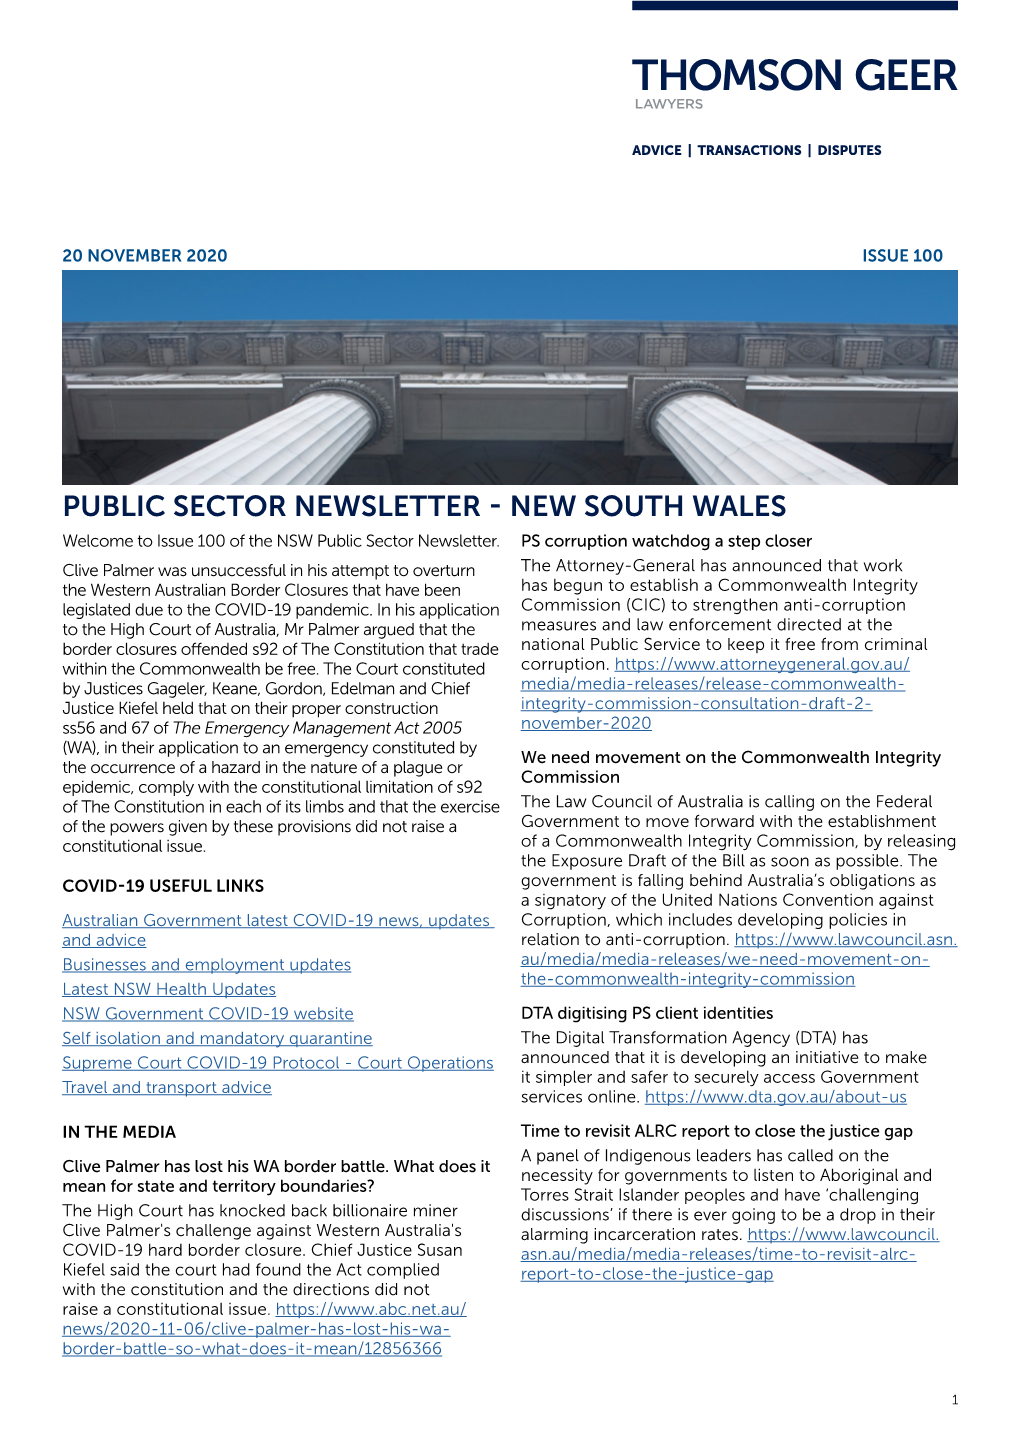 PUBLIC SECTOR NEWSLETTER - NEW SOUTH WALES Welcome to Issue 100 of the NSW Public Sector Newsletter